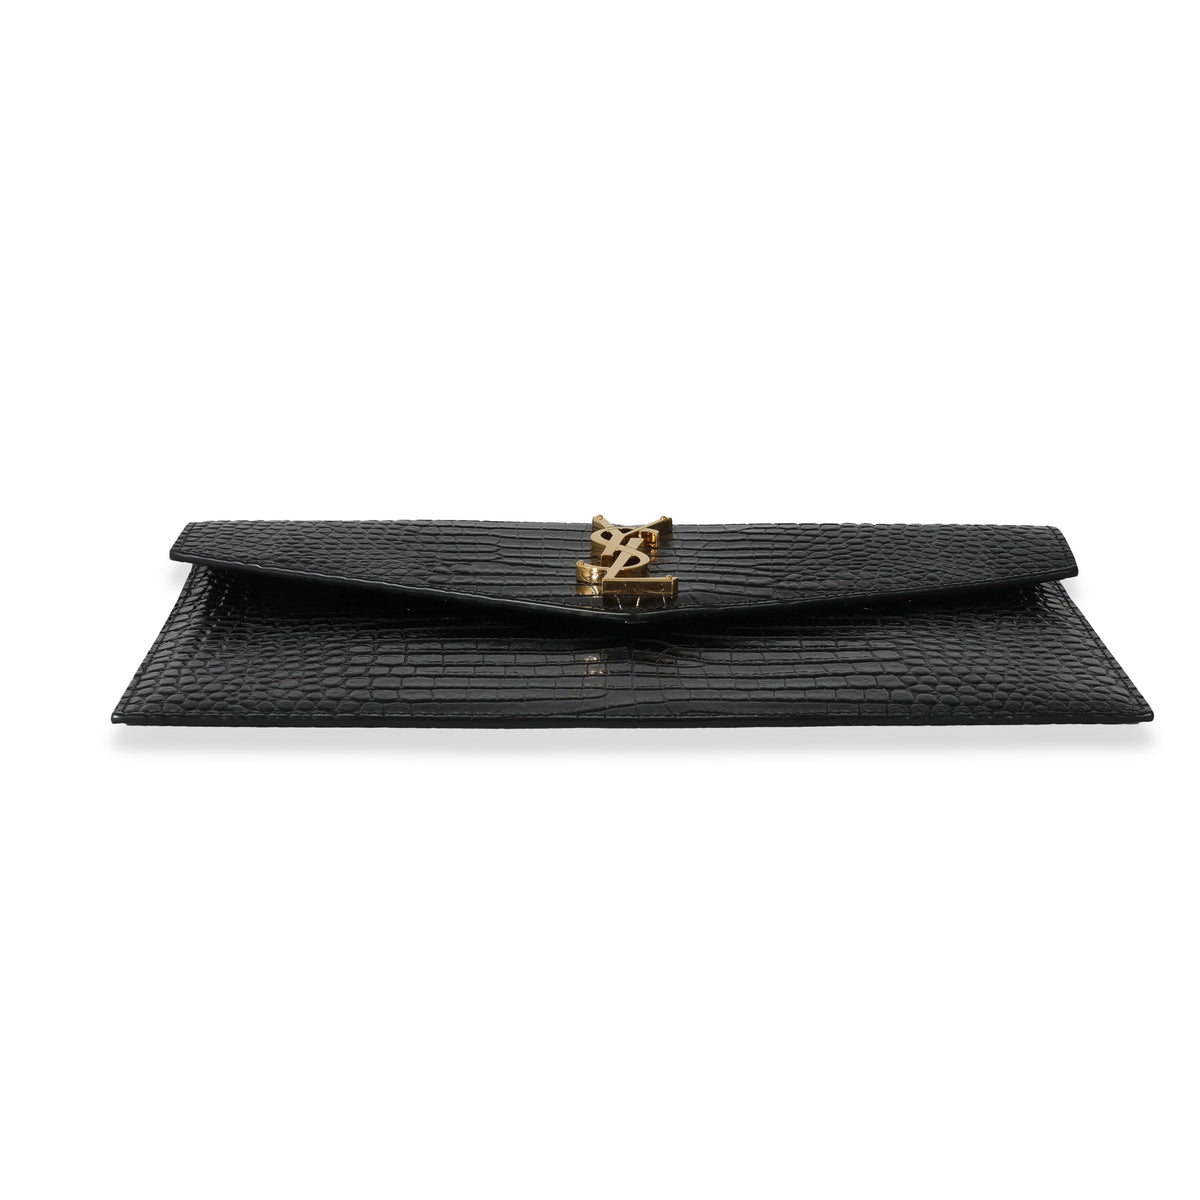 Saint Laurent Uptown Croc Embossed Leather Pouch in Black